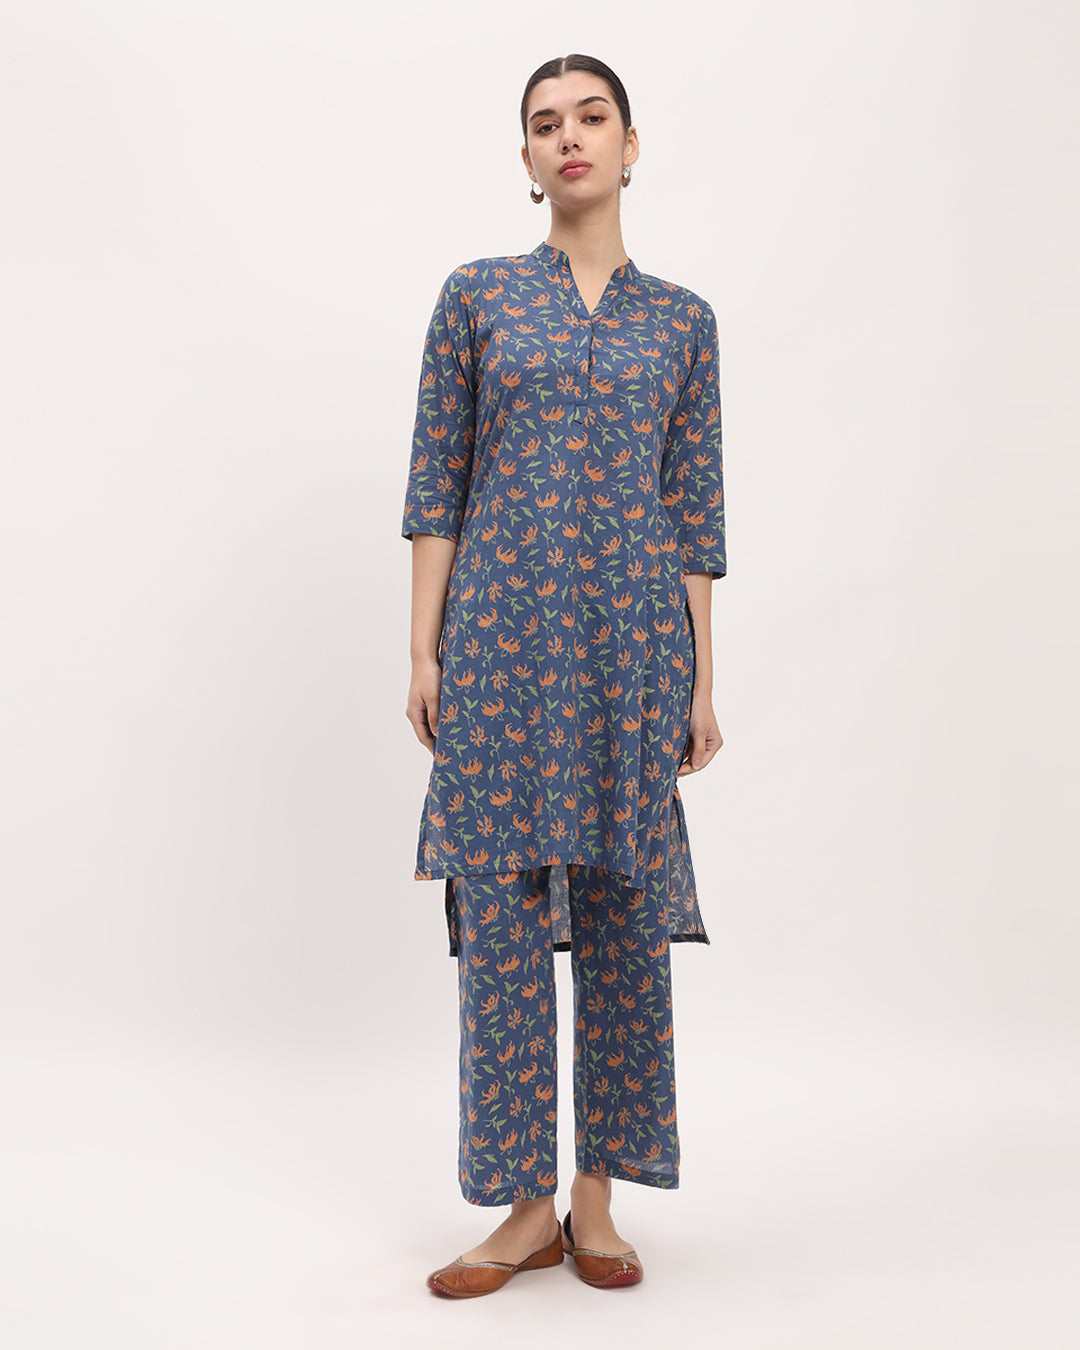 Combo: English Floral Garden & Fire Lillies High-Low Printed Kurta (Without Bottoms)